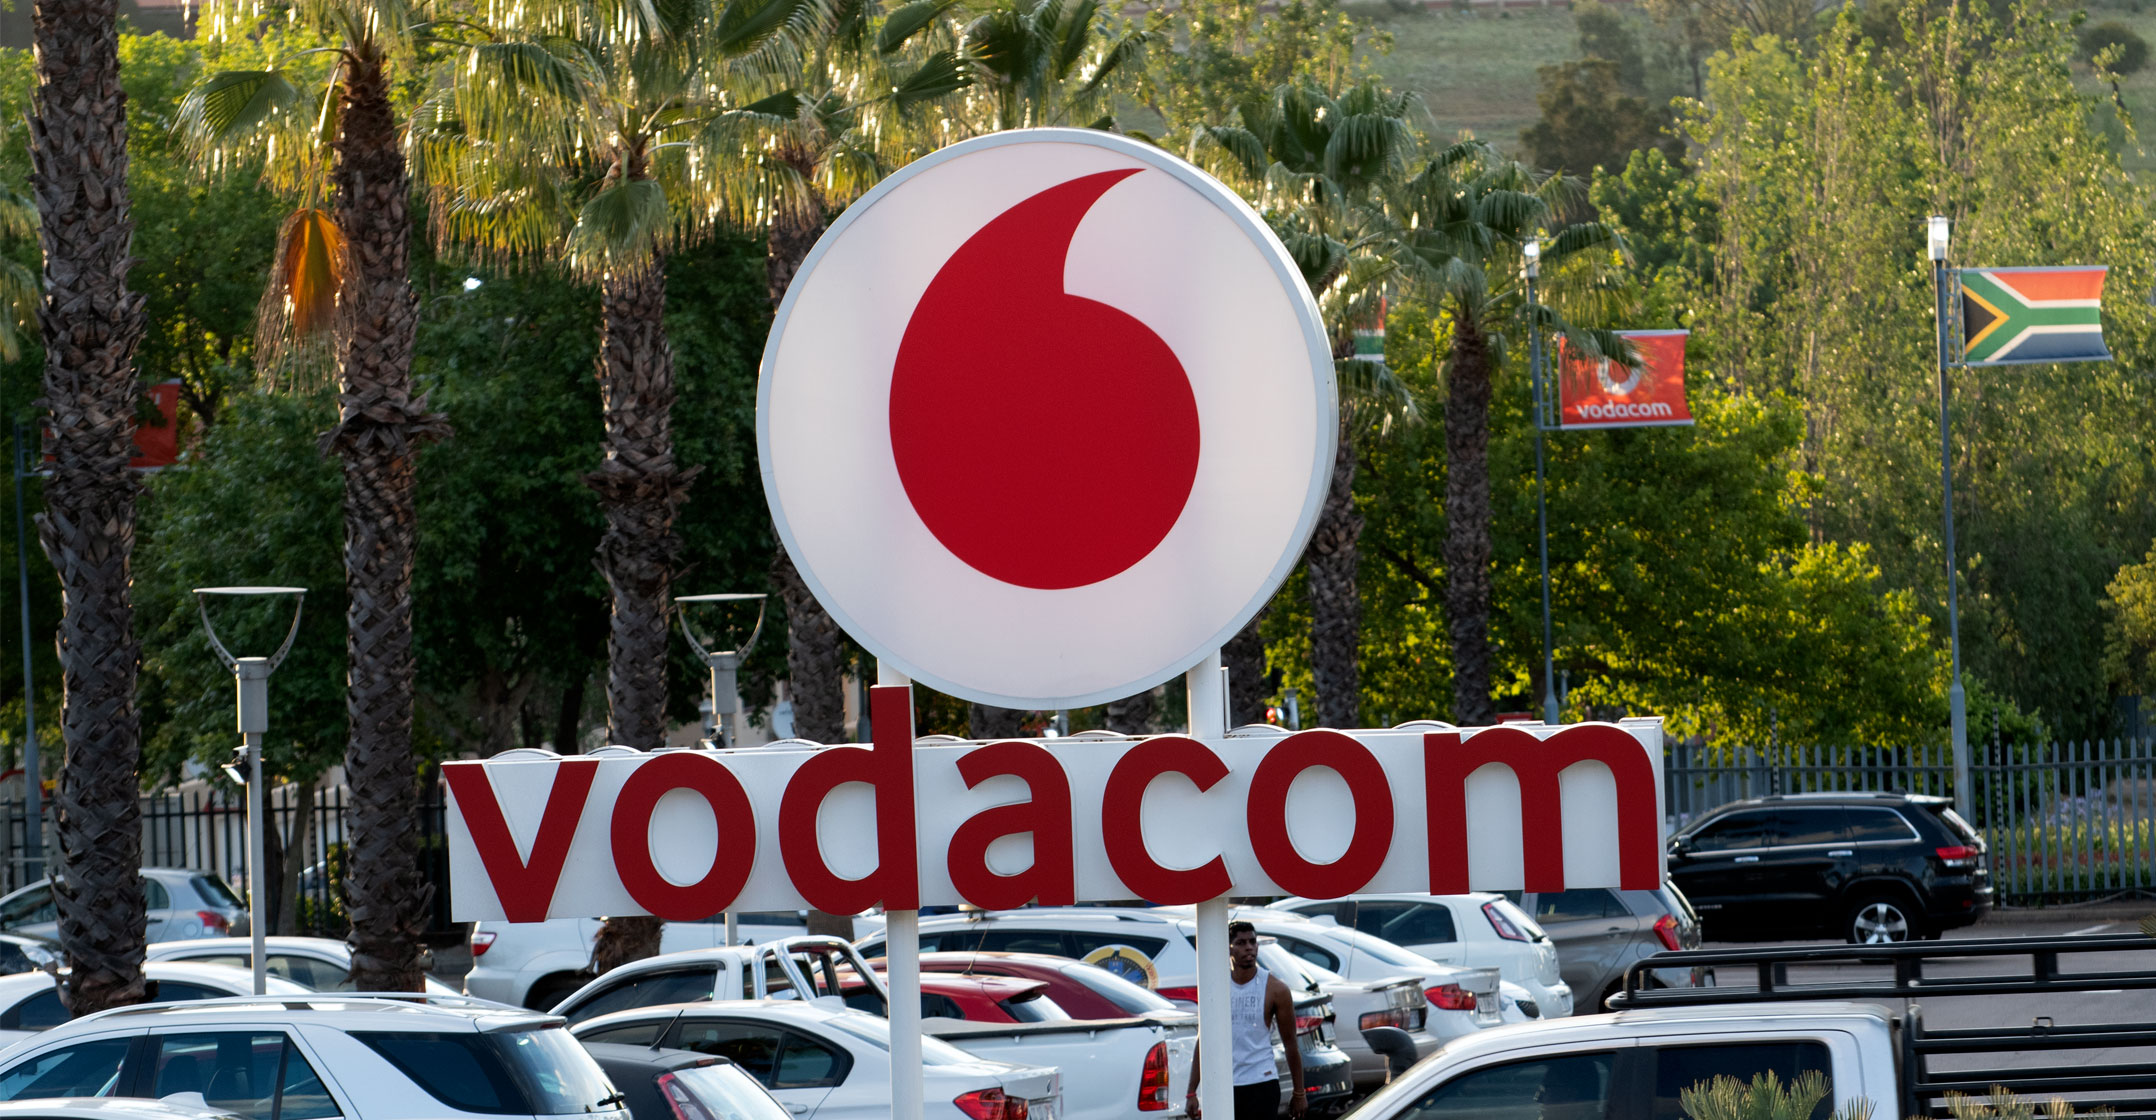 Vodacom To Sell Business Assets To Improve Operation